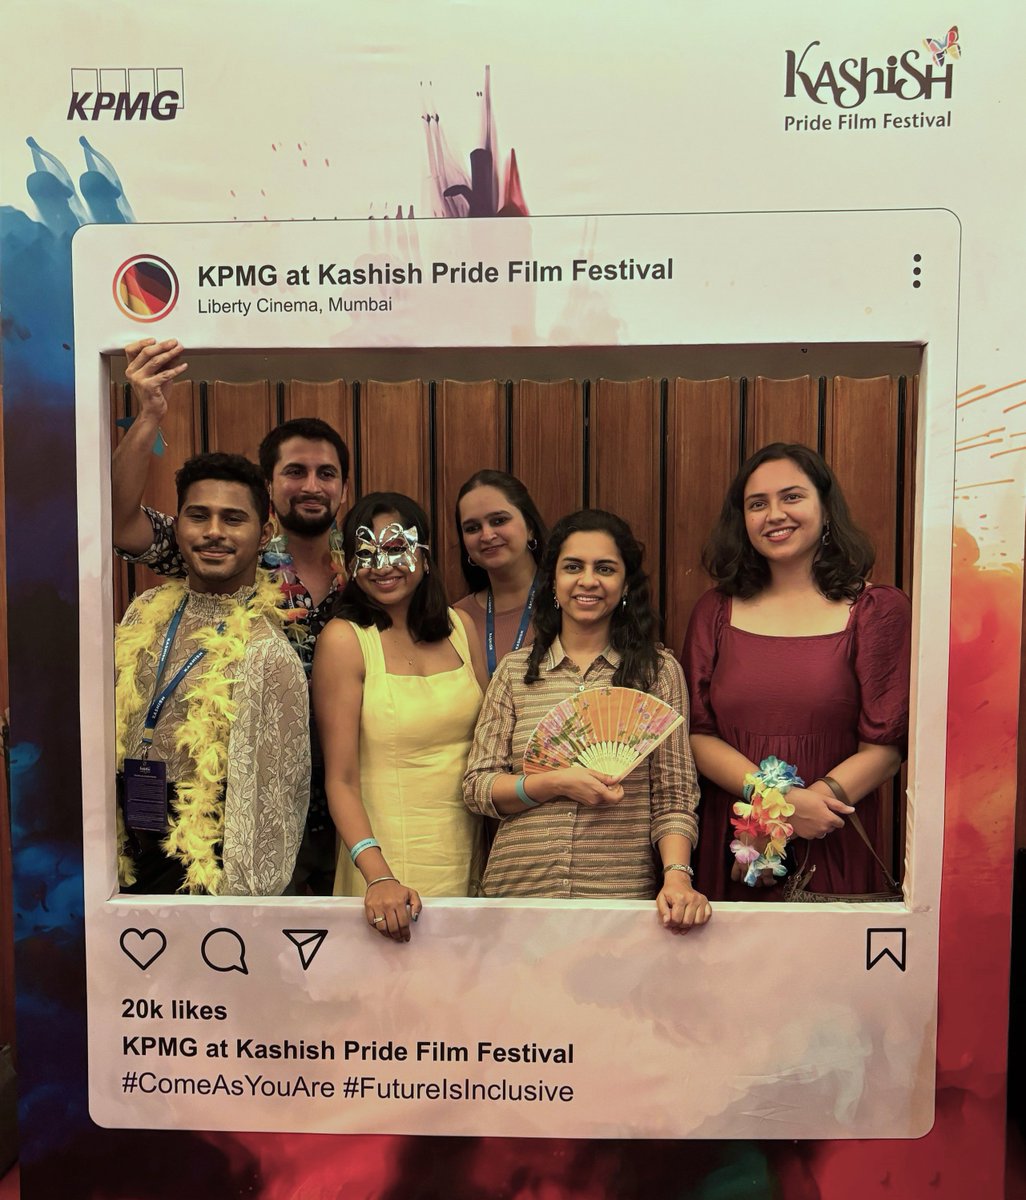 We were delighted to collaborate with @KashishFilmFest as their ✨ Angel Sponsors ✨. This partnership underscores our commitment to #diversity and #inclusion, using the art of film to amplify #LGBTQ+ voices and stories | #KGS #KPMGGlobalServices #ComeAsYouAre #futureisinclusive